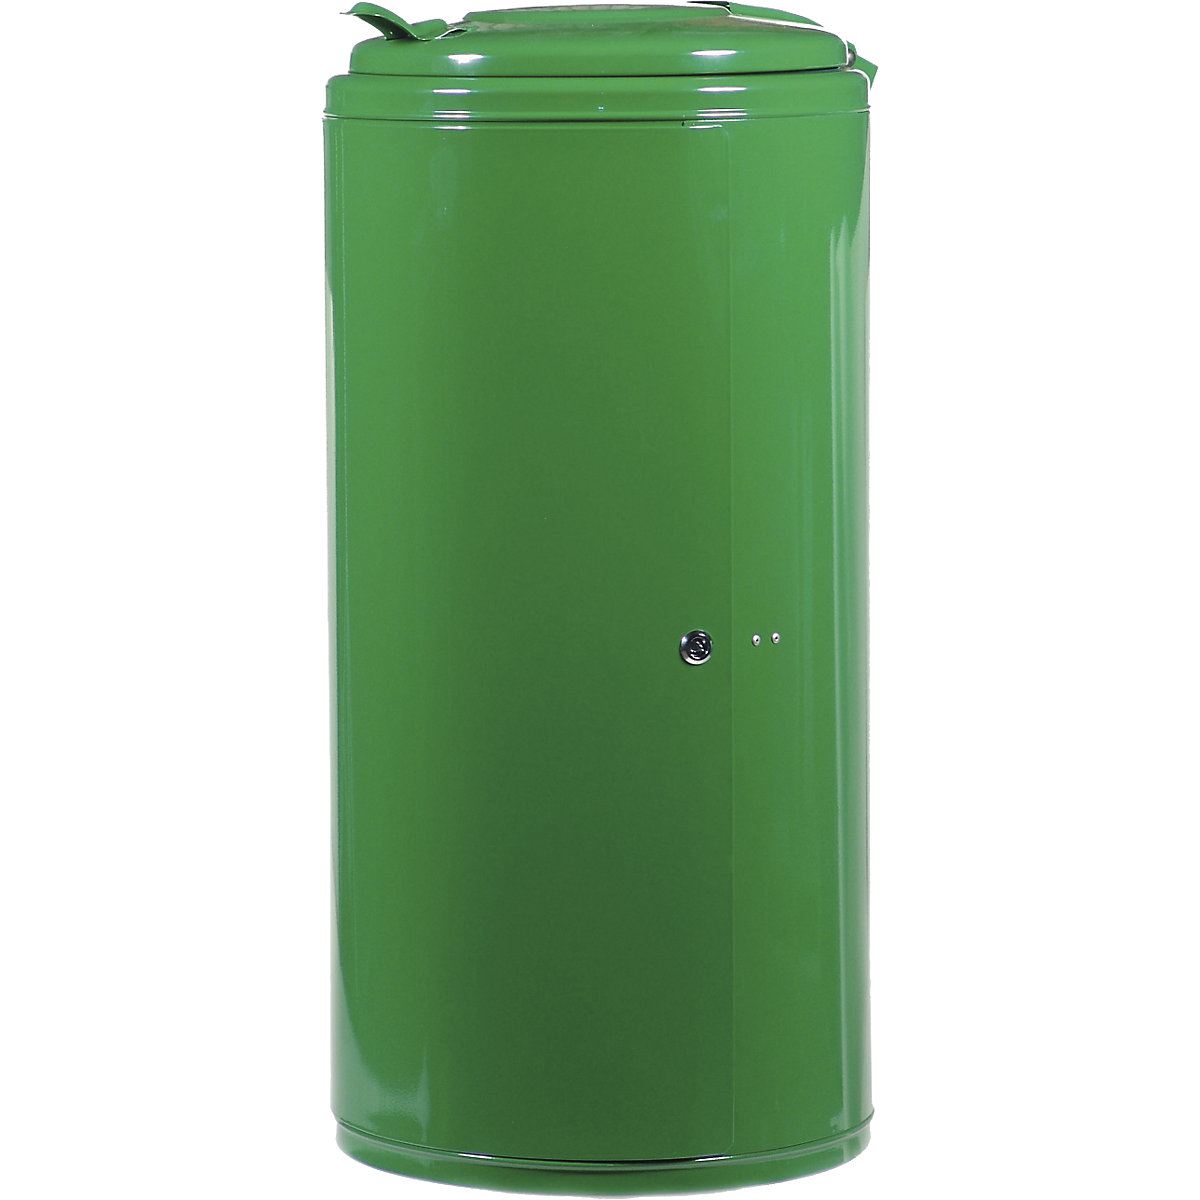 Waste collector, capacity 120 l, HxWxD 990 x 470 x 535 mm, green-1